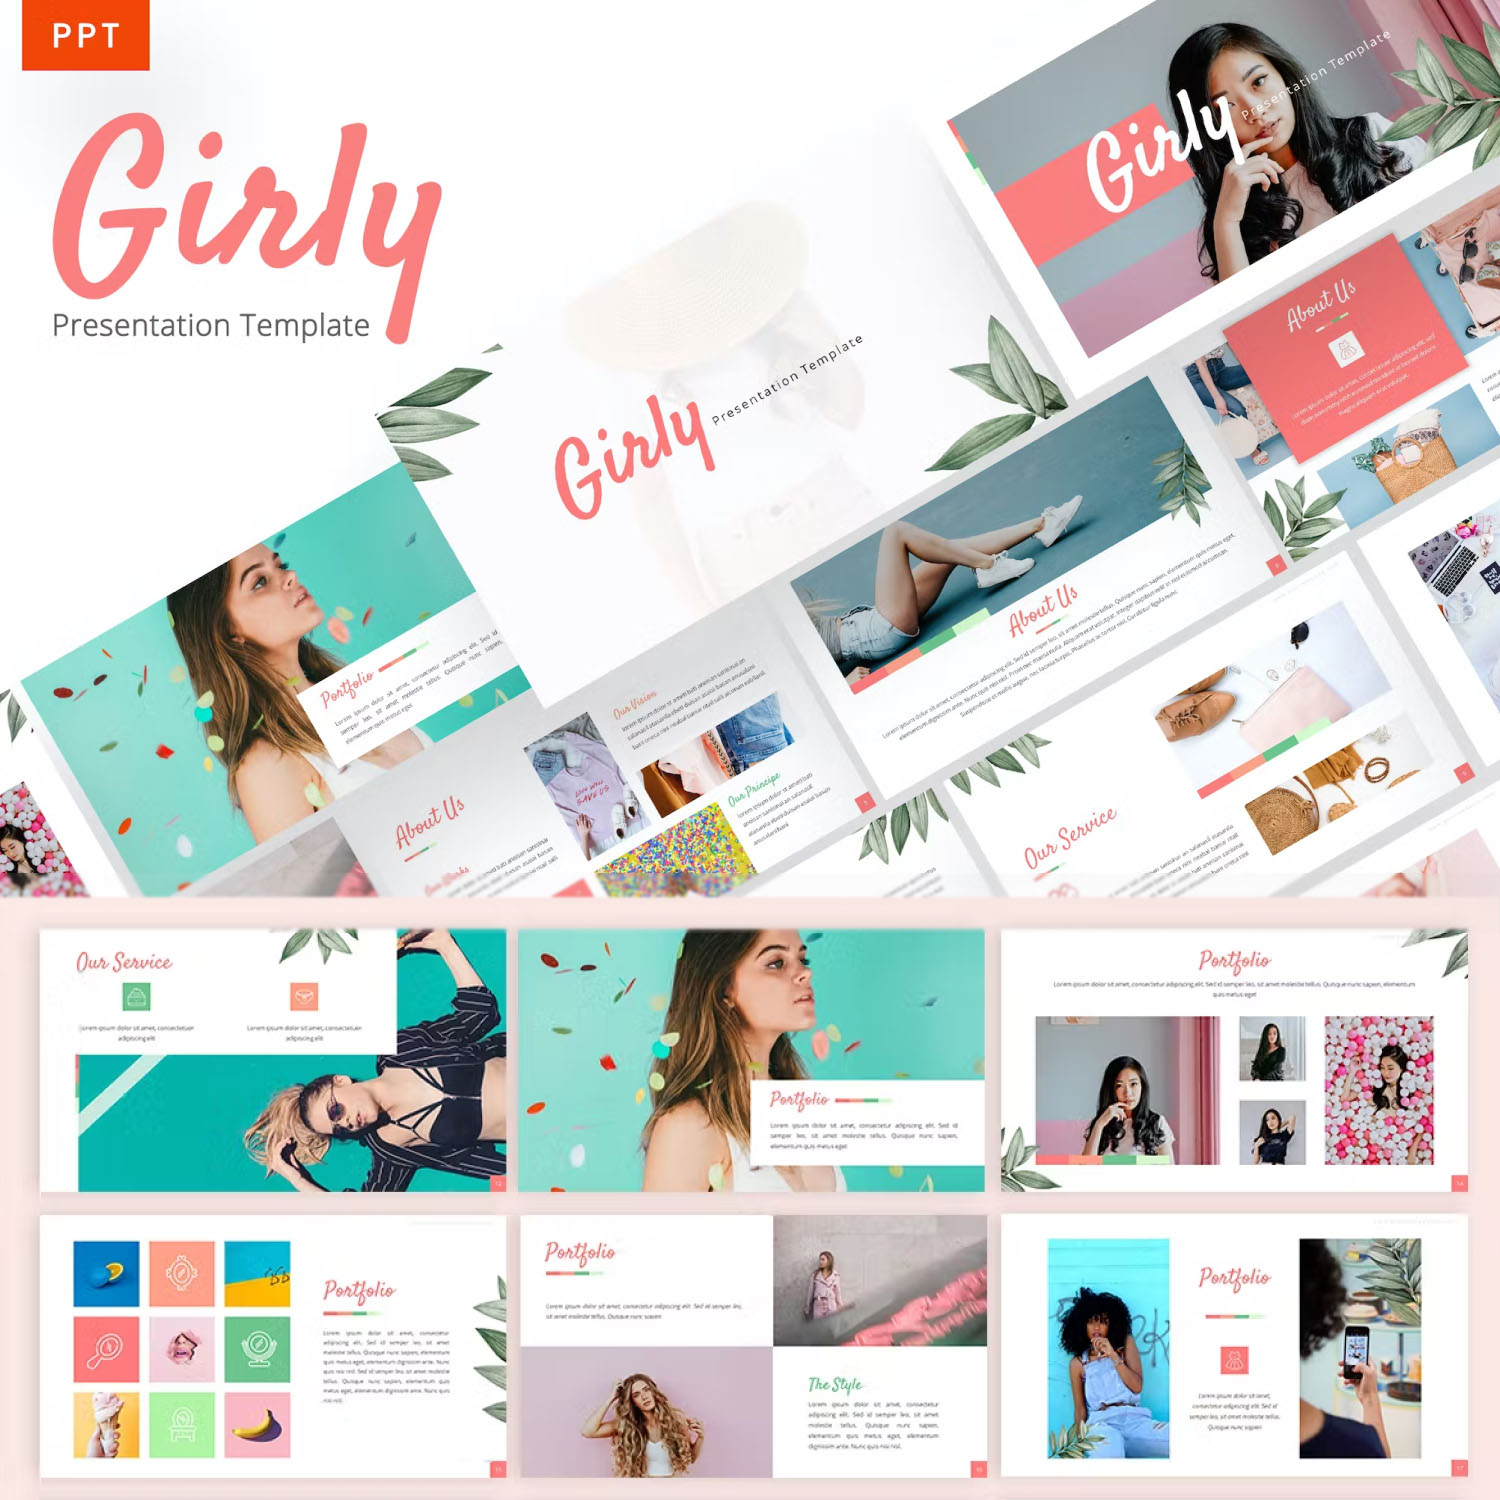 Girly beautiful powerpoint template preview.